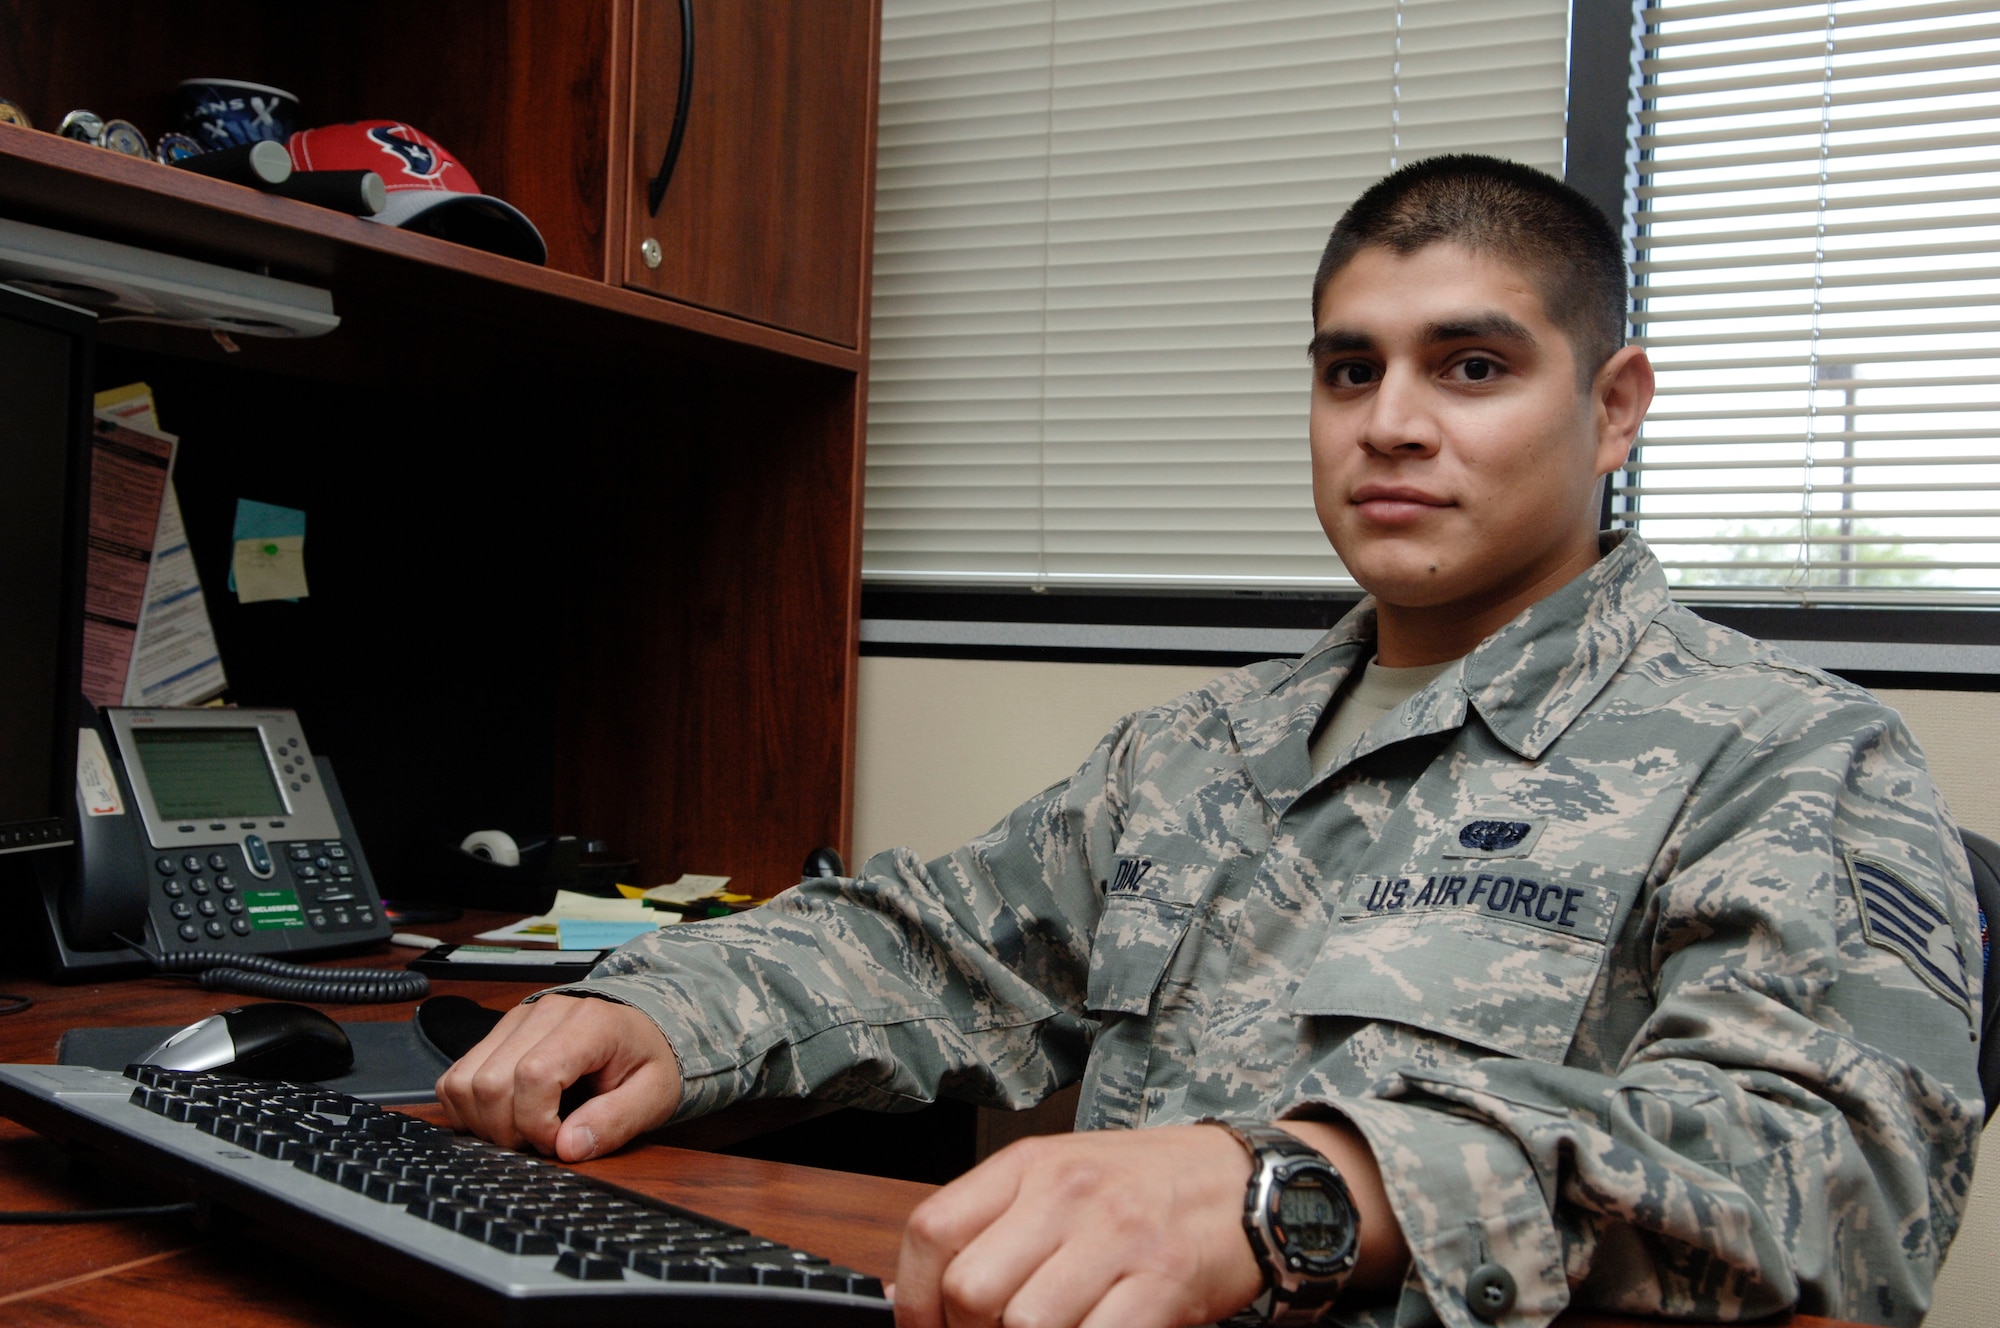 “I would like to have inner pockets on the uniform top, which would allow for more storage.” - Staff Sgt. Fernando Diaz, 12th Air Force (Air Forces Southern) Client System Support. 